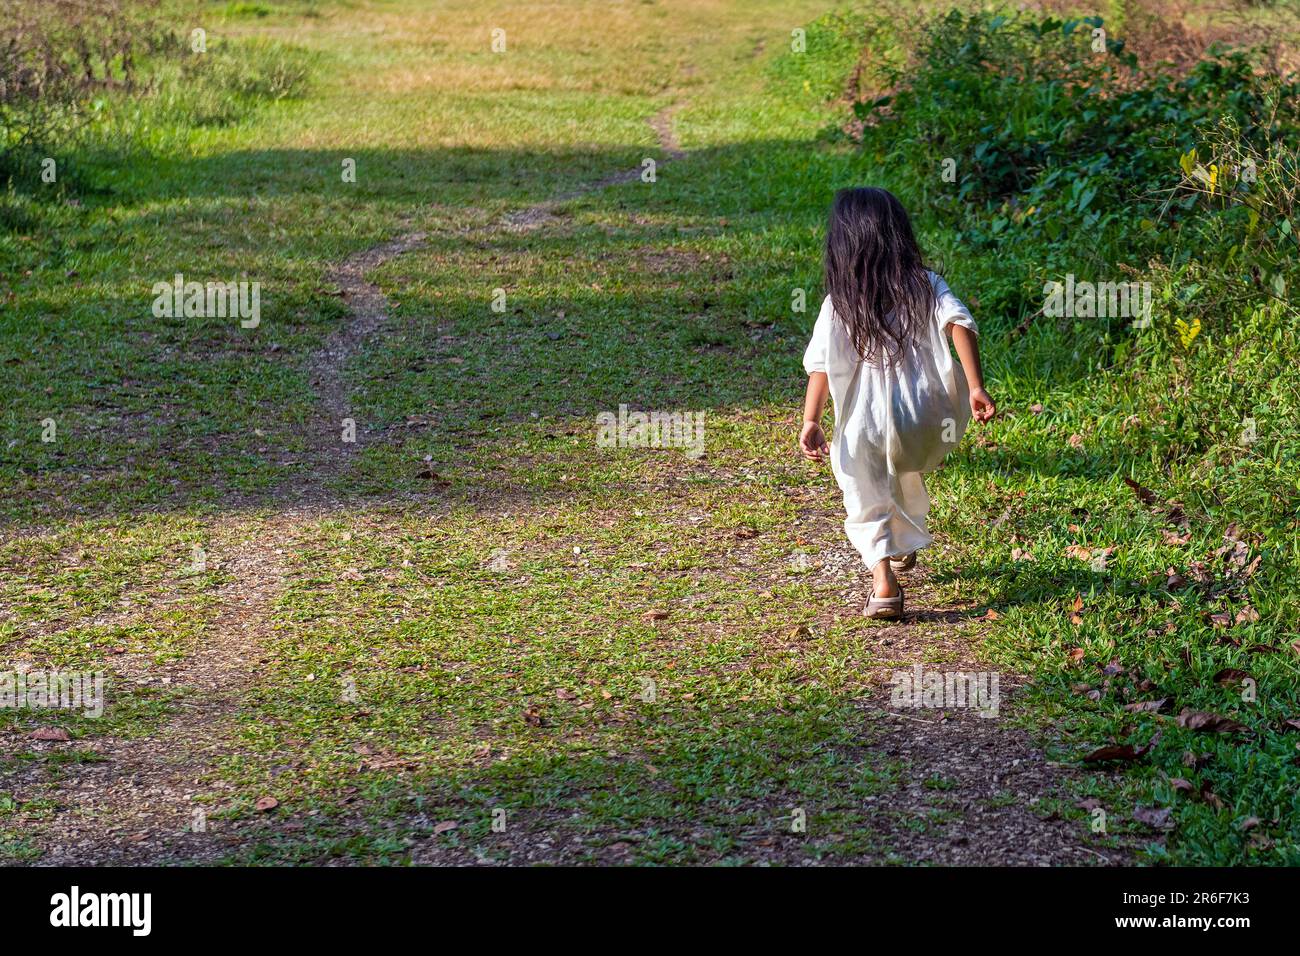 Mexican indigenous Lacandon Mayan girl in traditional white dress, Chiapas rainforest, Mexico. Stock Photo